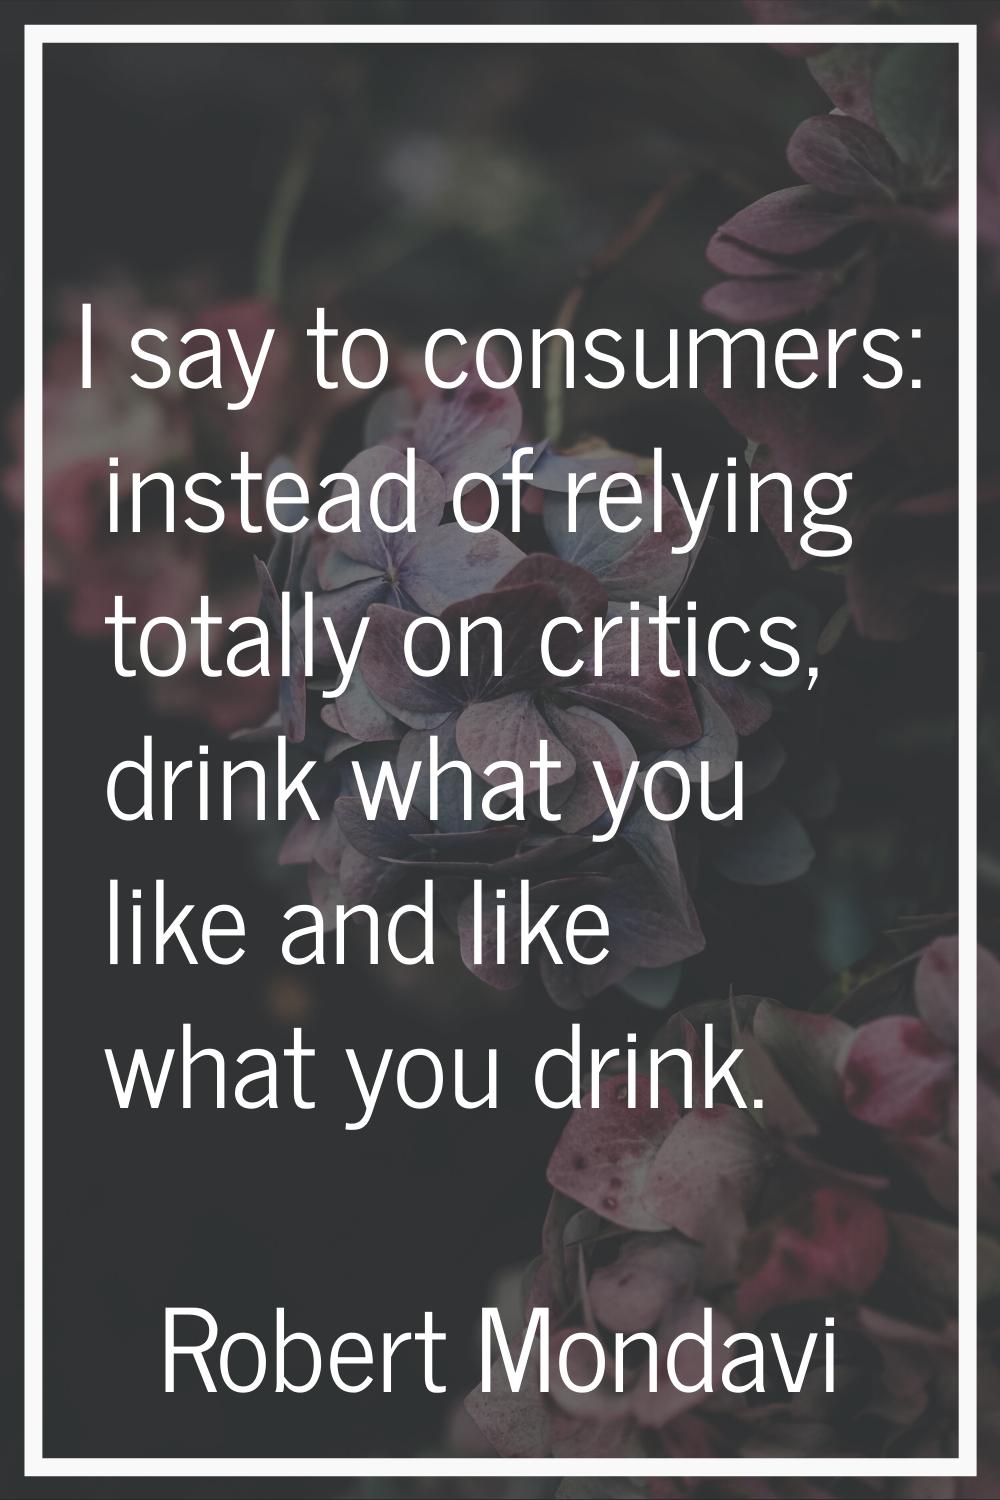 I say to consumers: instead of relying totally on critics, drink what you like and like what you dr